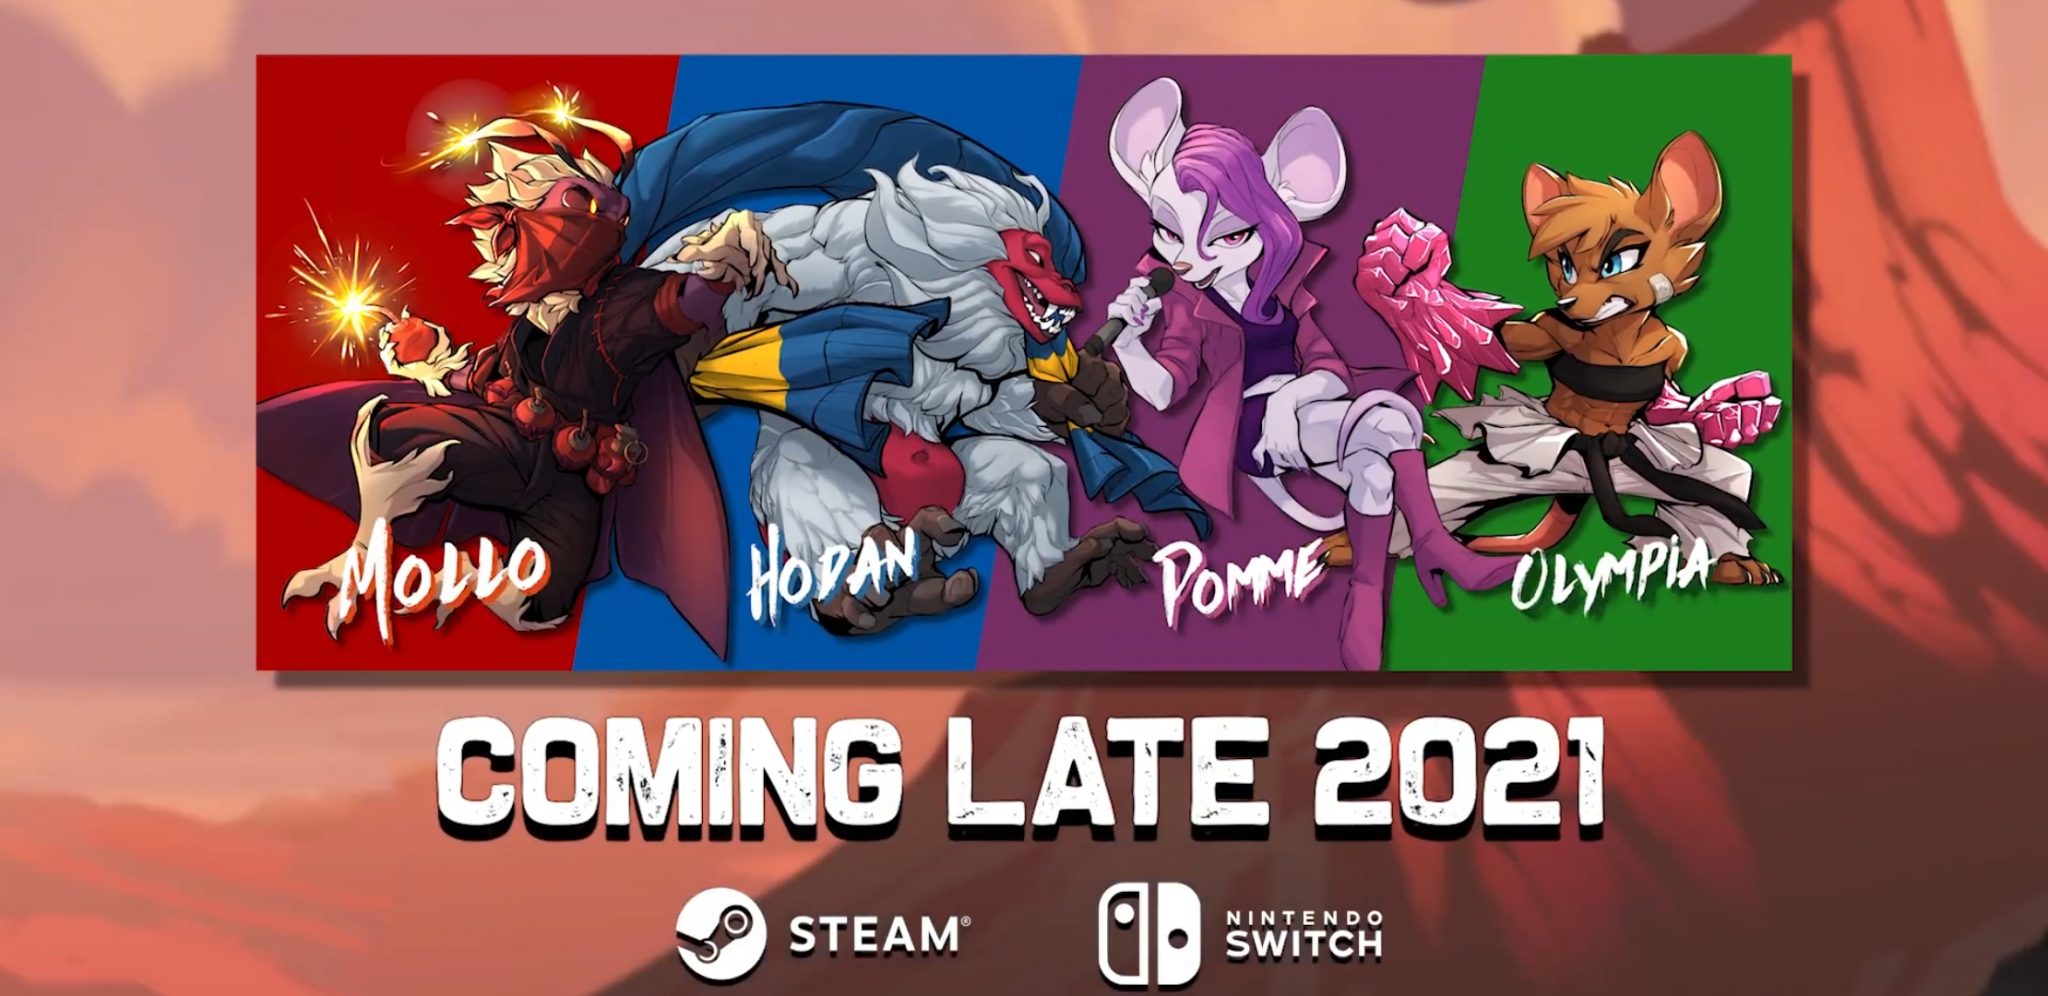 rivals of aether steam